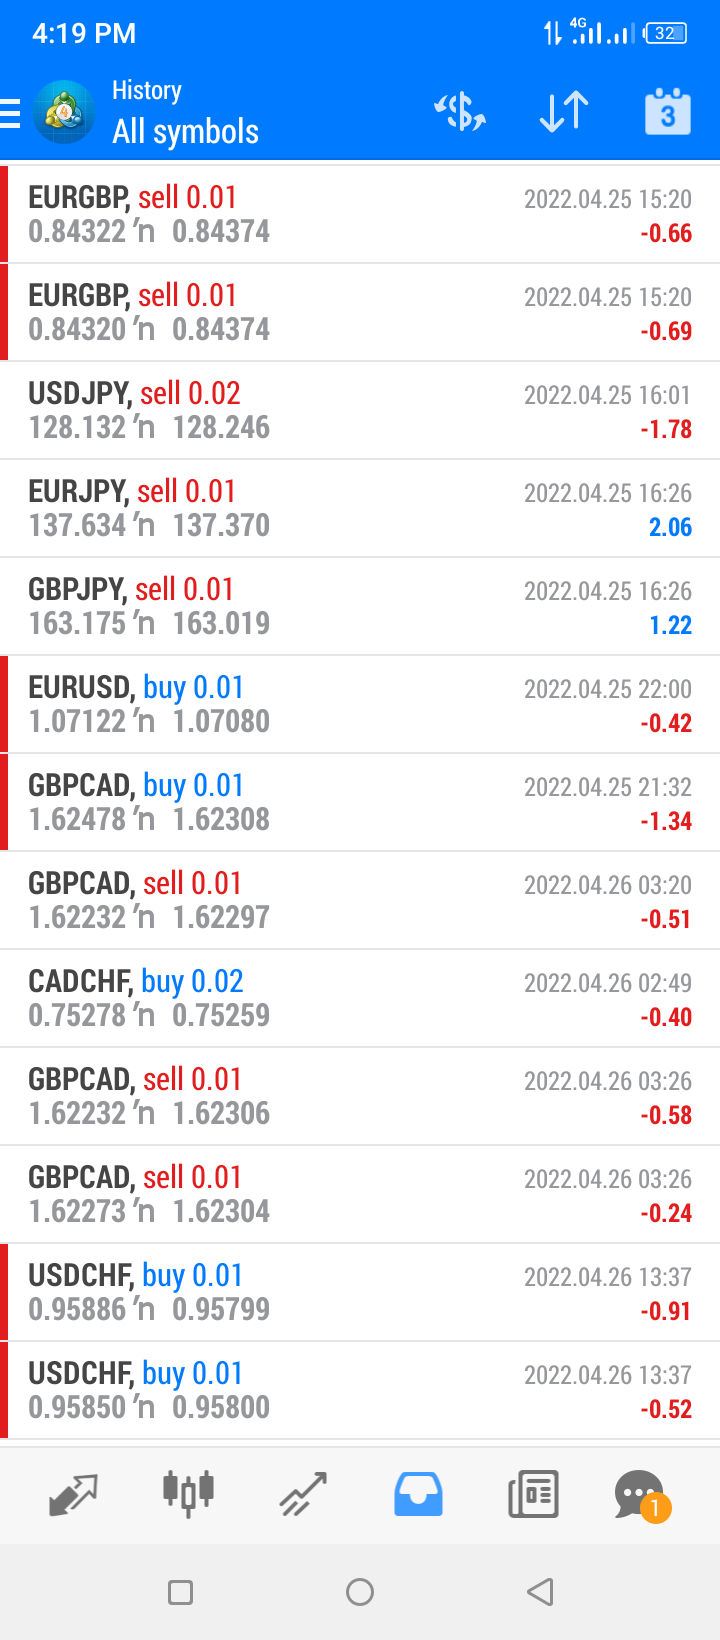 FOREX LIVE TRADING : $107 TO $100,000. (BAL : $21) - Investment - Nigeria